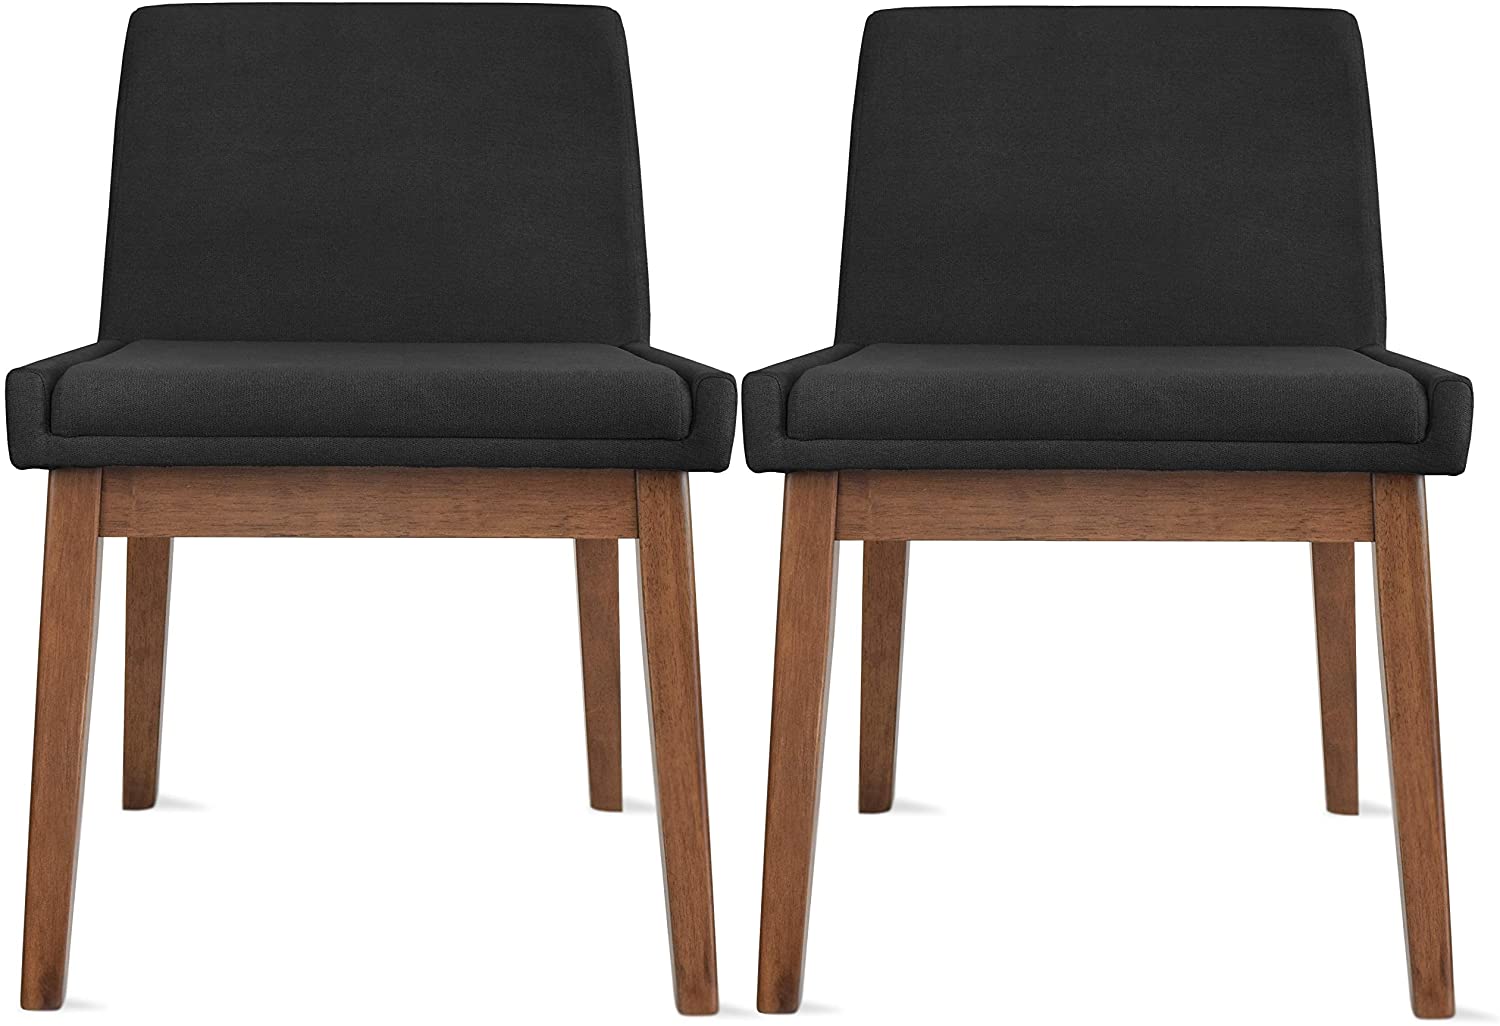 B08Q62T185 2xhome Set of 2 Brown Wood Leg Dining Room Chair with Black Cushion Back & Upholstered Seat